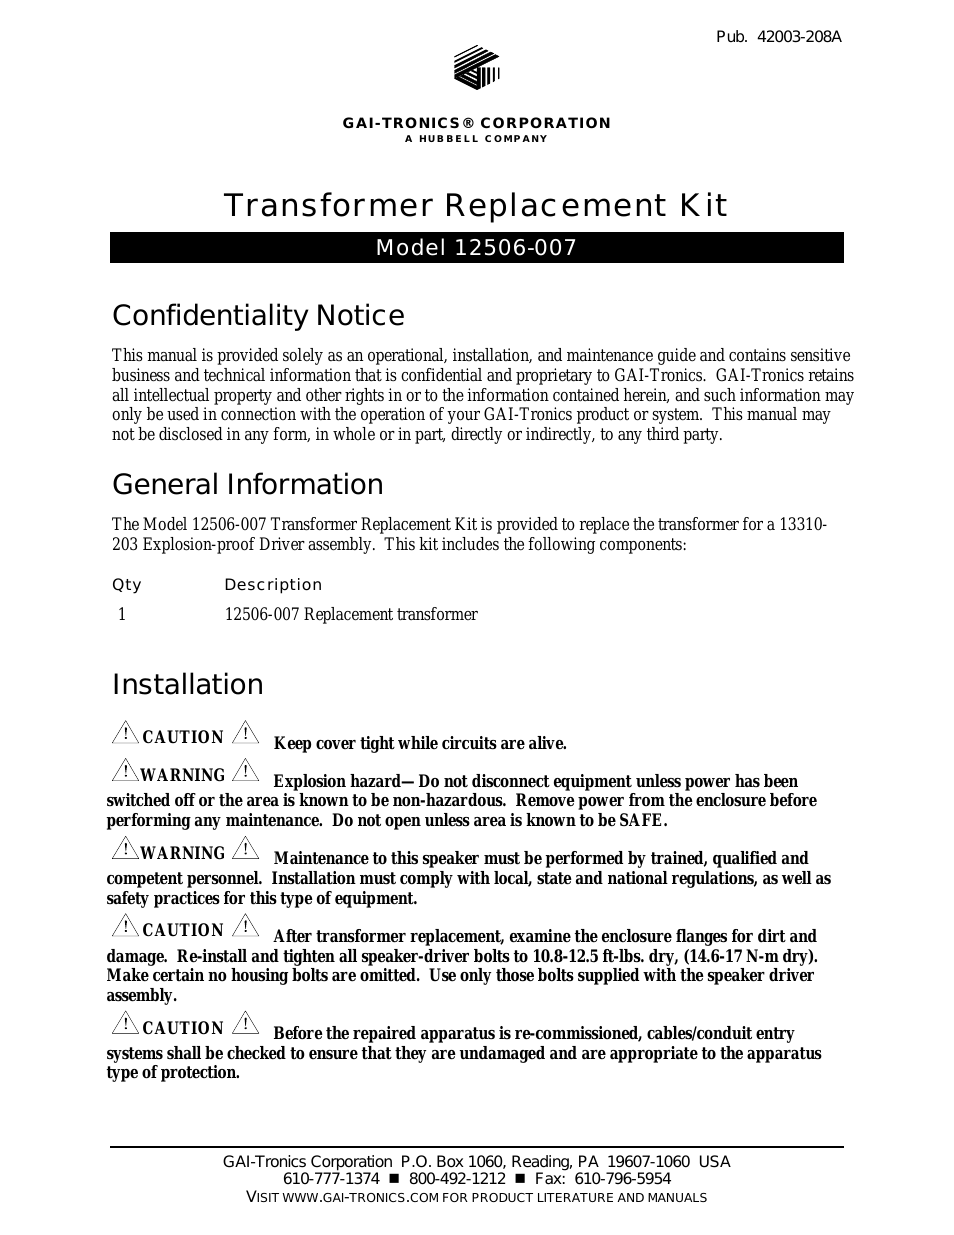 12506-007 Replacement Transformer